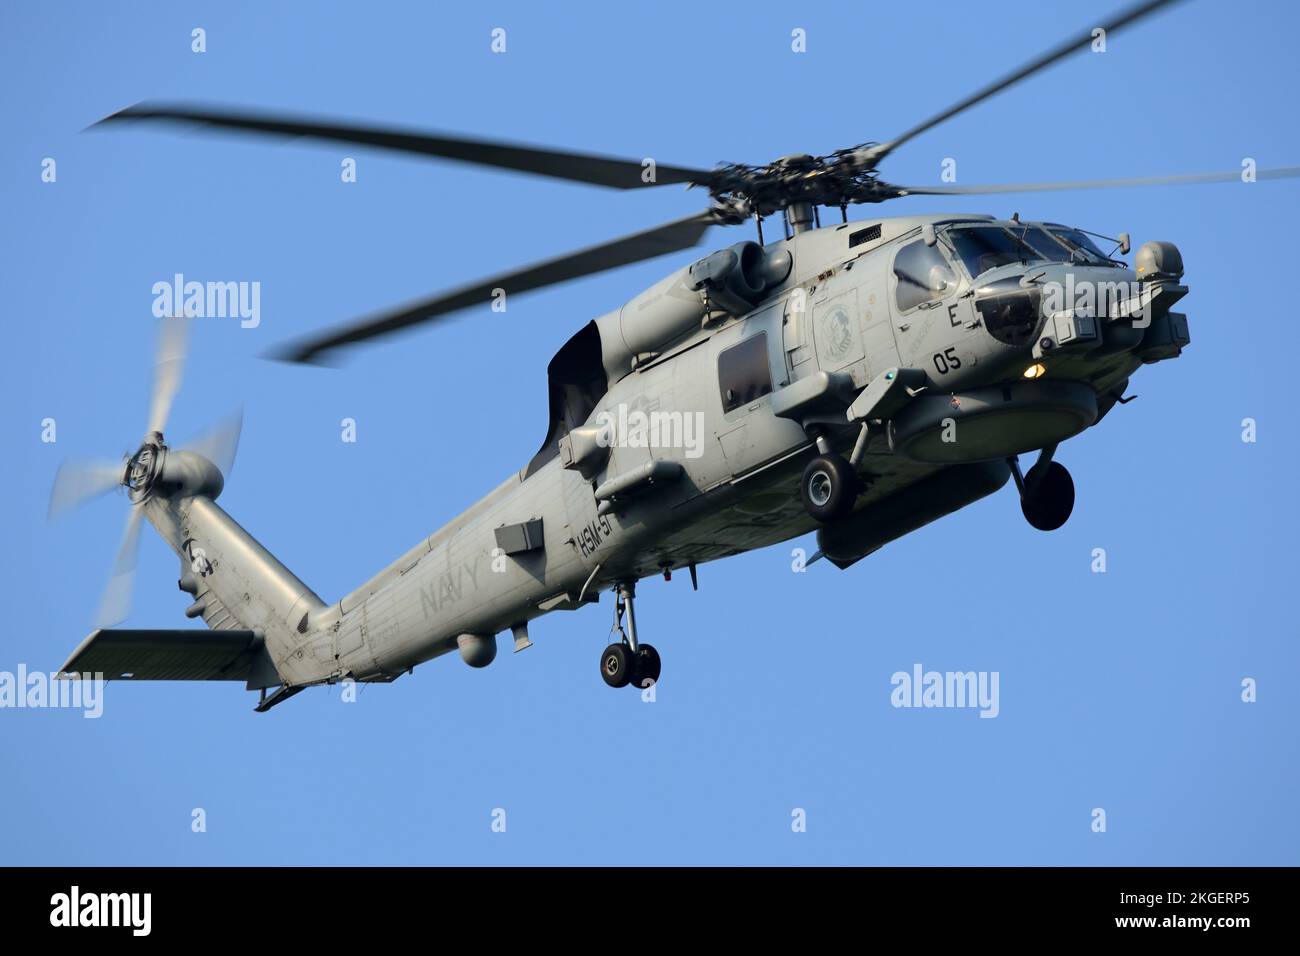 Kanagawa Prefecture, Japan - July 15, 2014: United States Navy Sikorsky MH-60R Seahawk utility maritime helicopter from HSM-51 Warlords. Stock Photo